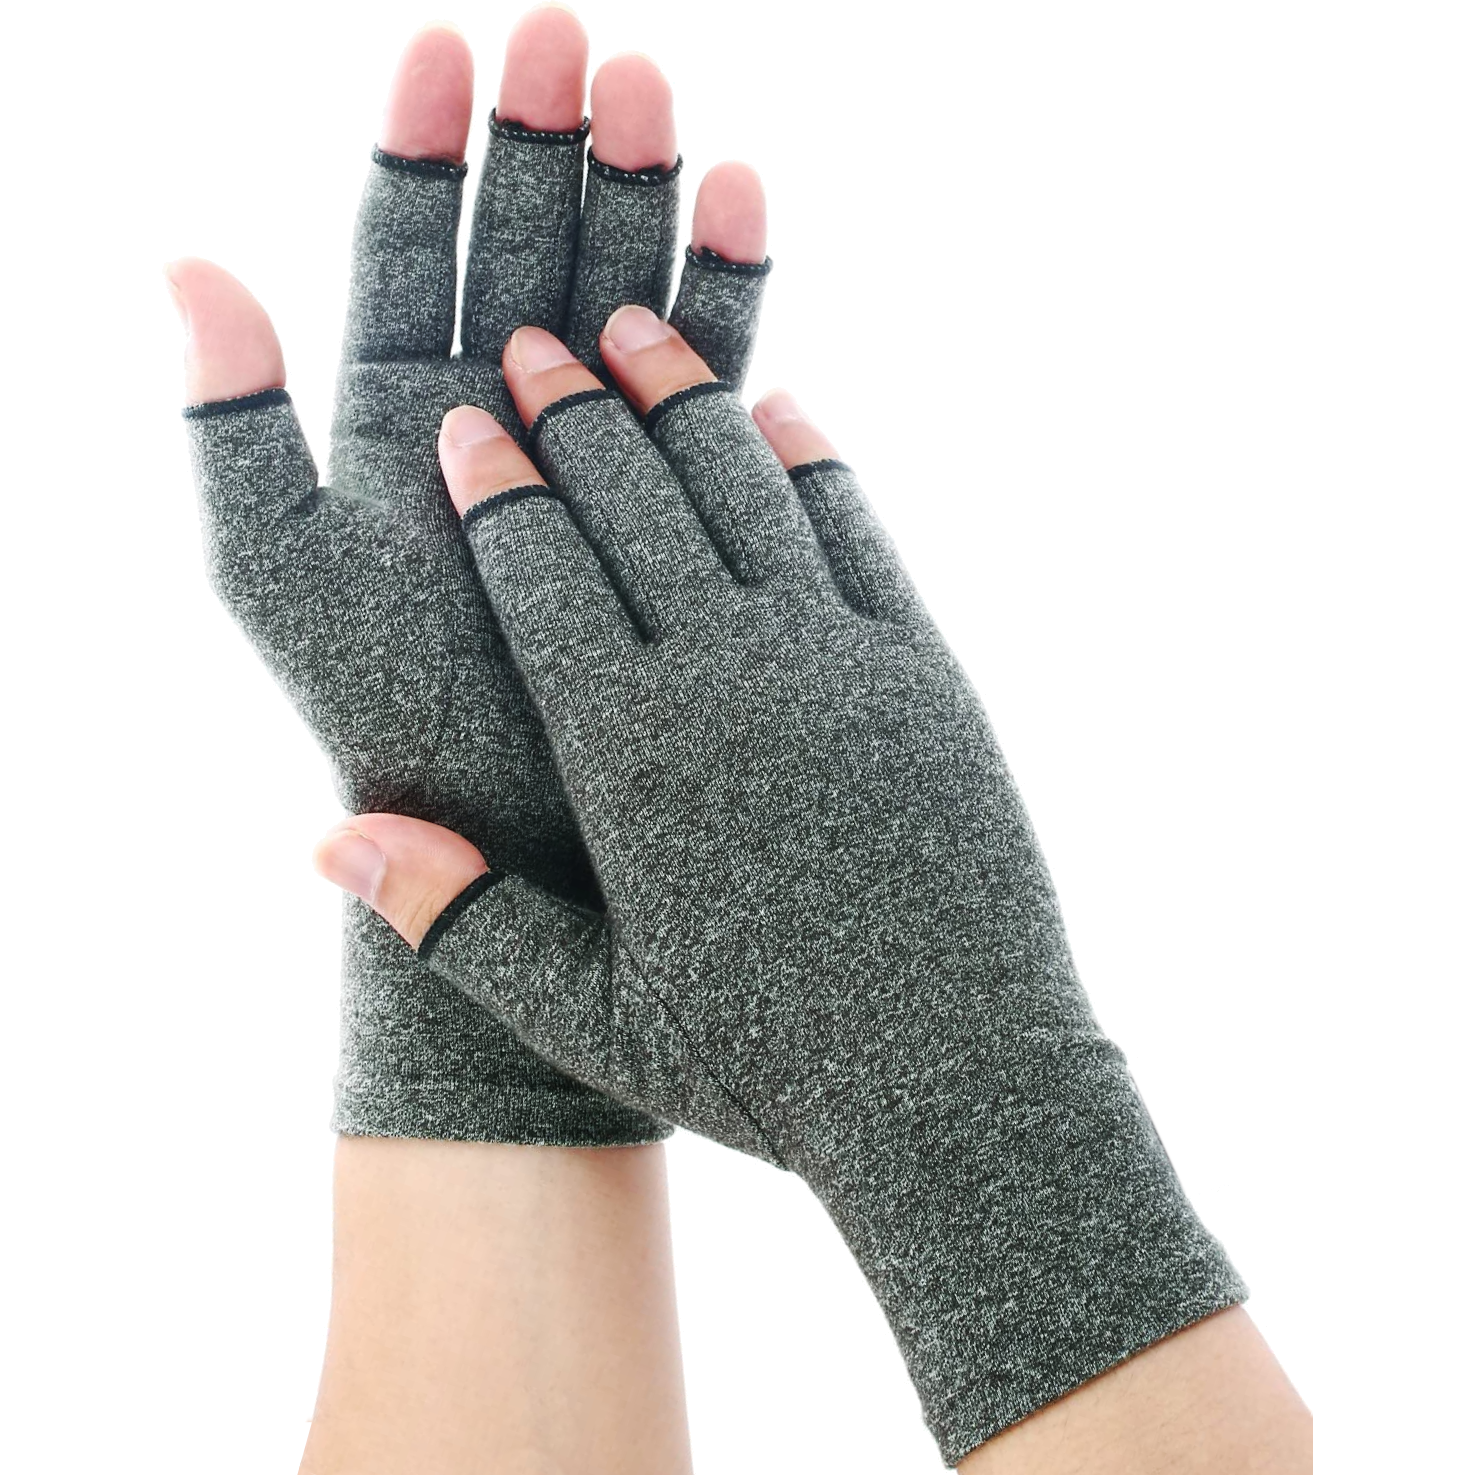 gloves for cold typing fingers